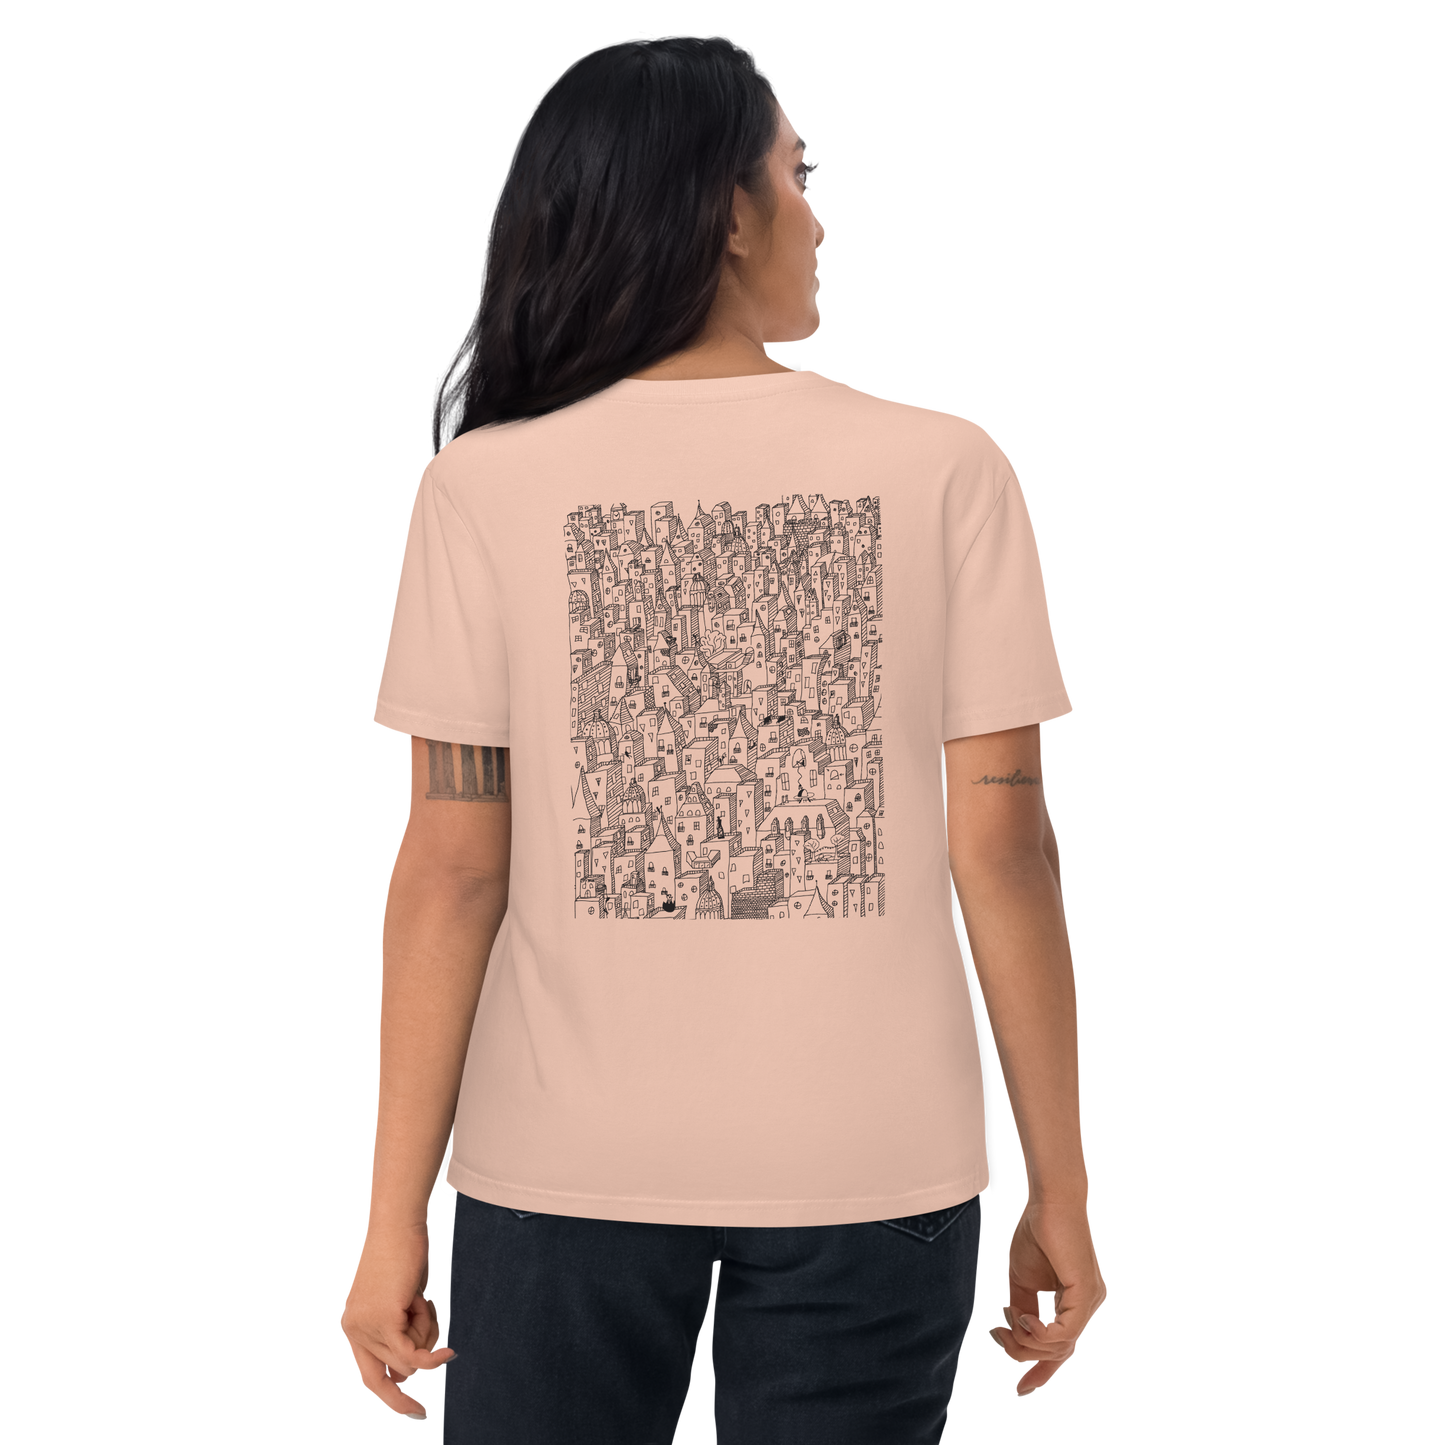 Too Many Rooftops T-shirt Unisex